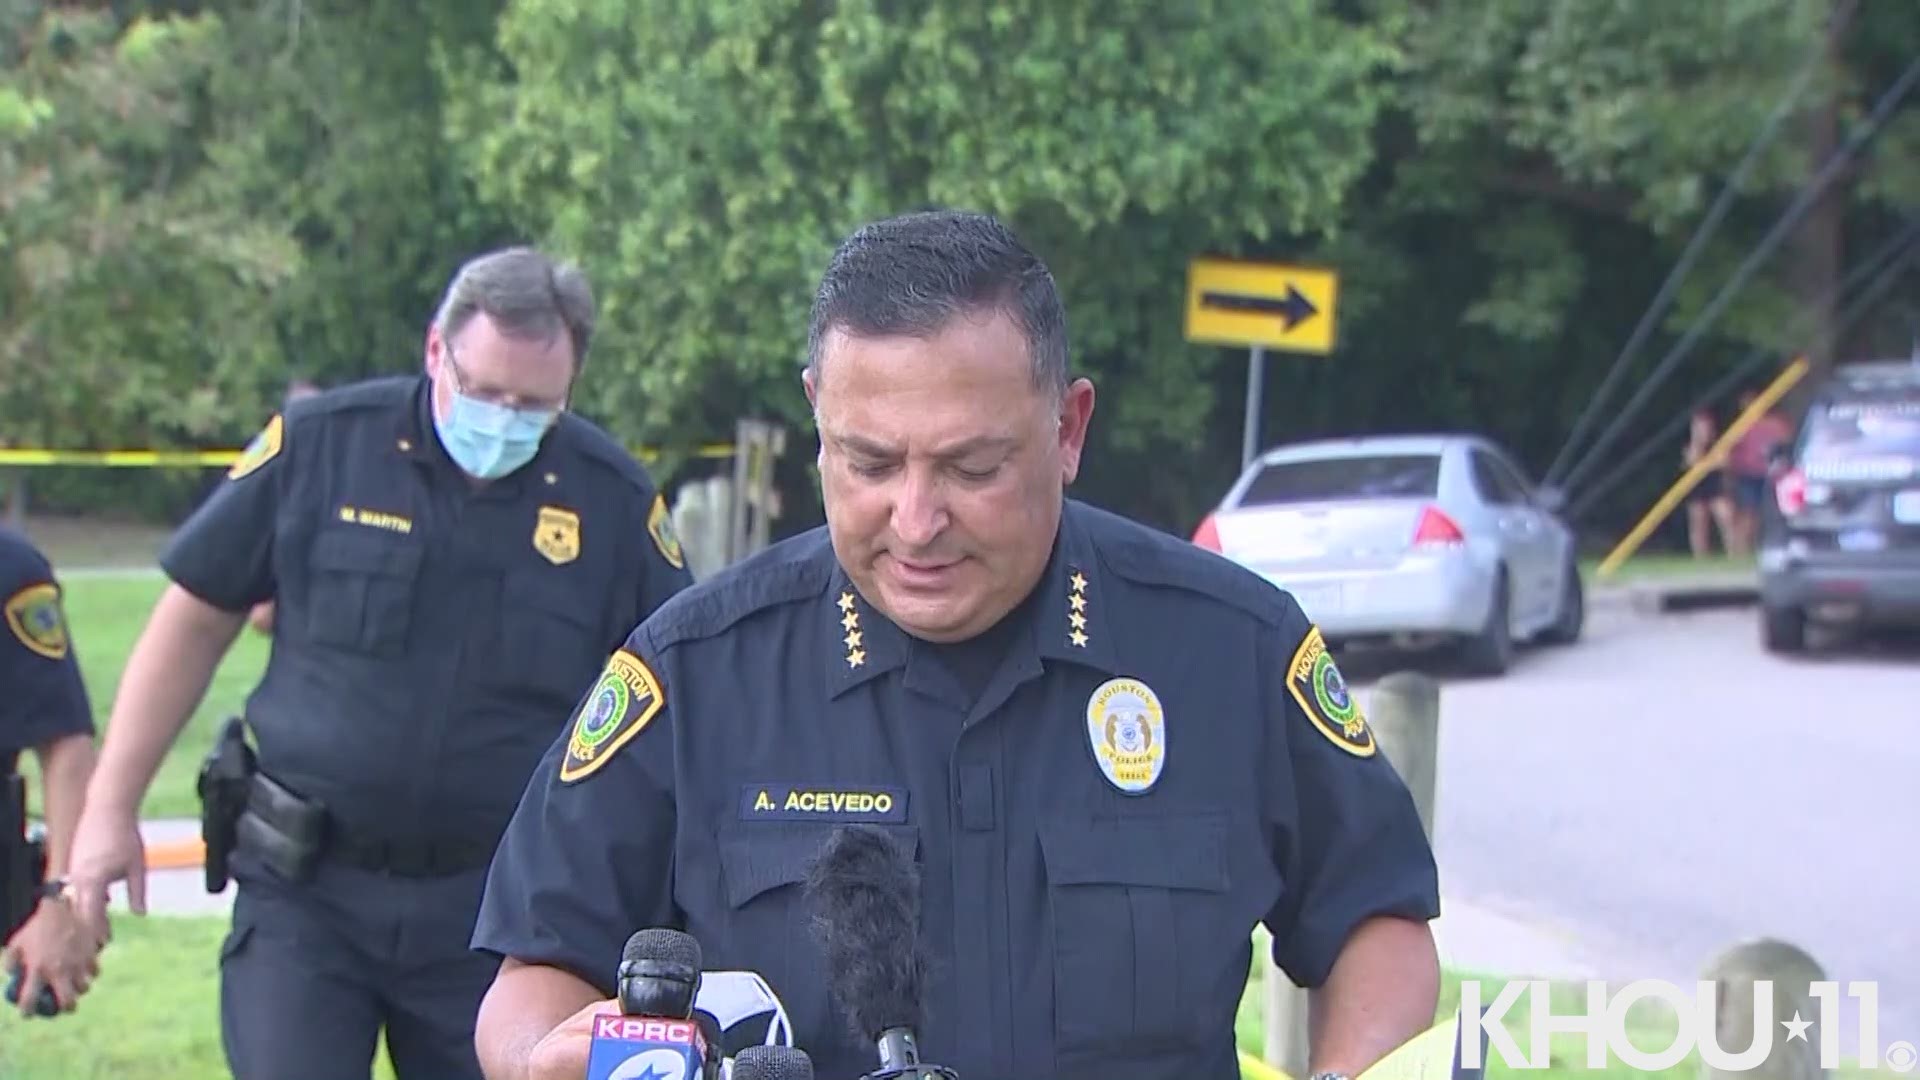 Houston Police Chief Art Acevedo shares details on the child's body found in Brays Bayou in southeast Houston. Acevedo said the body is 'most likely' Maliyah Bass.